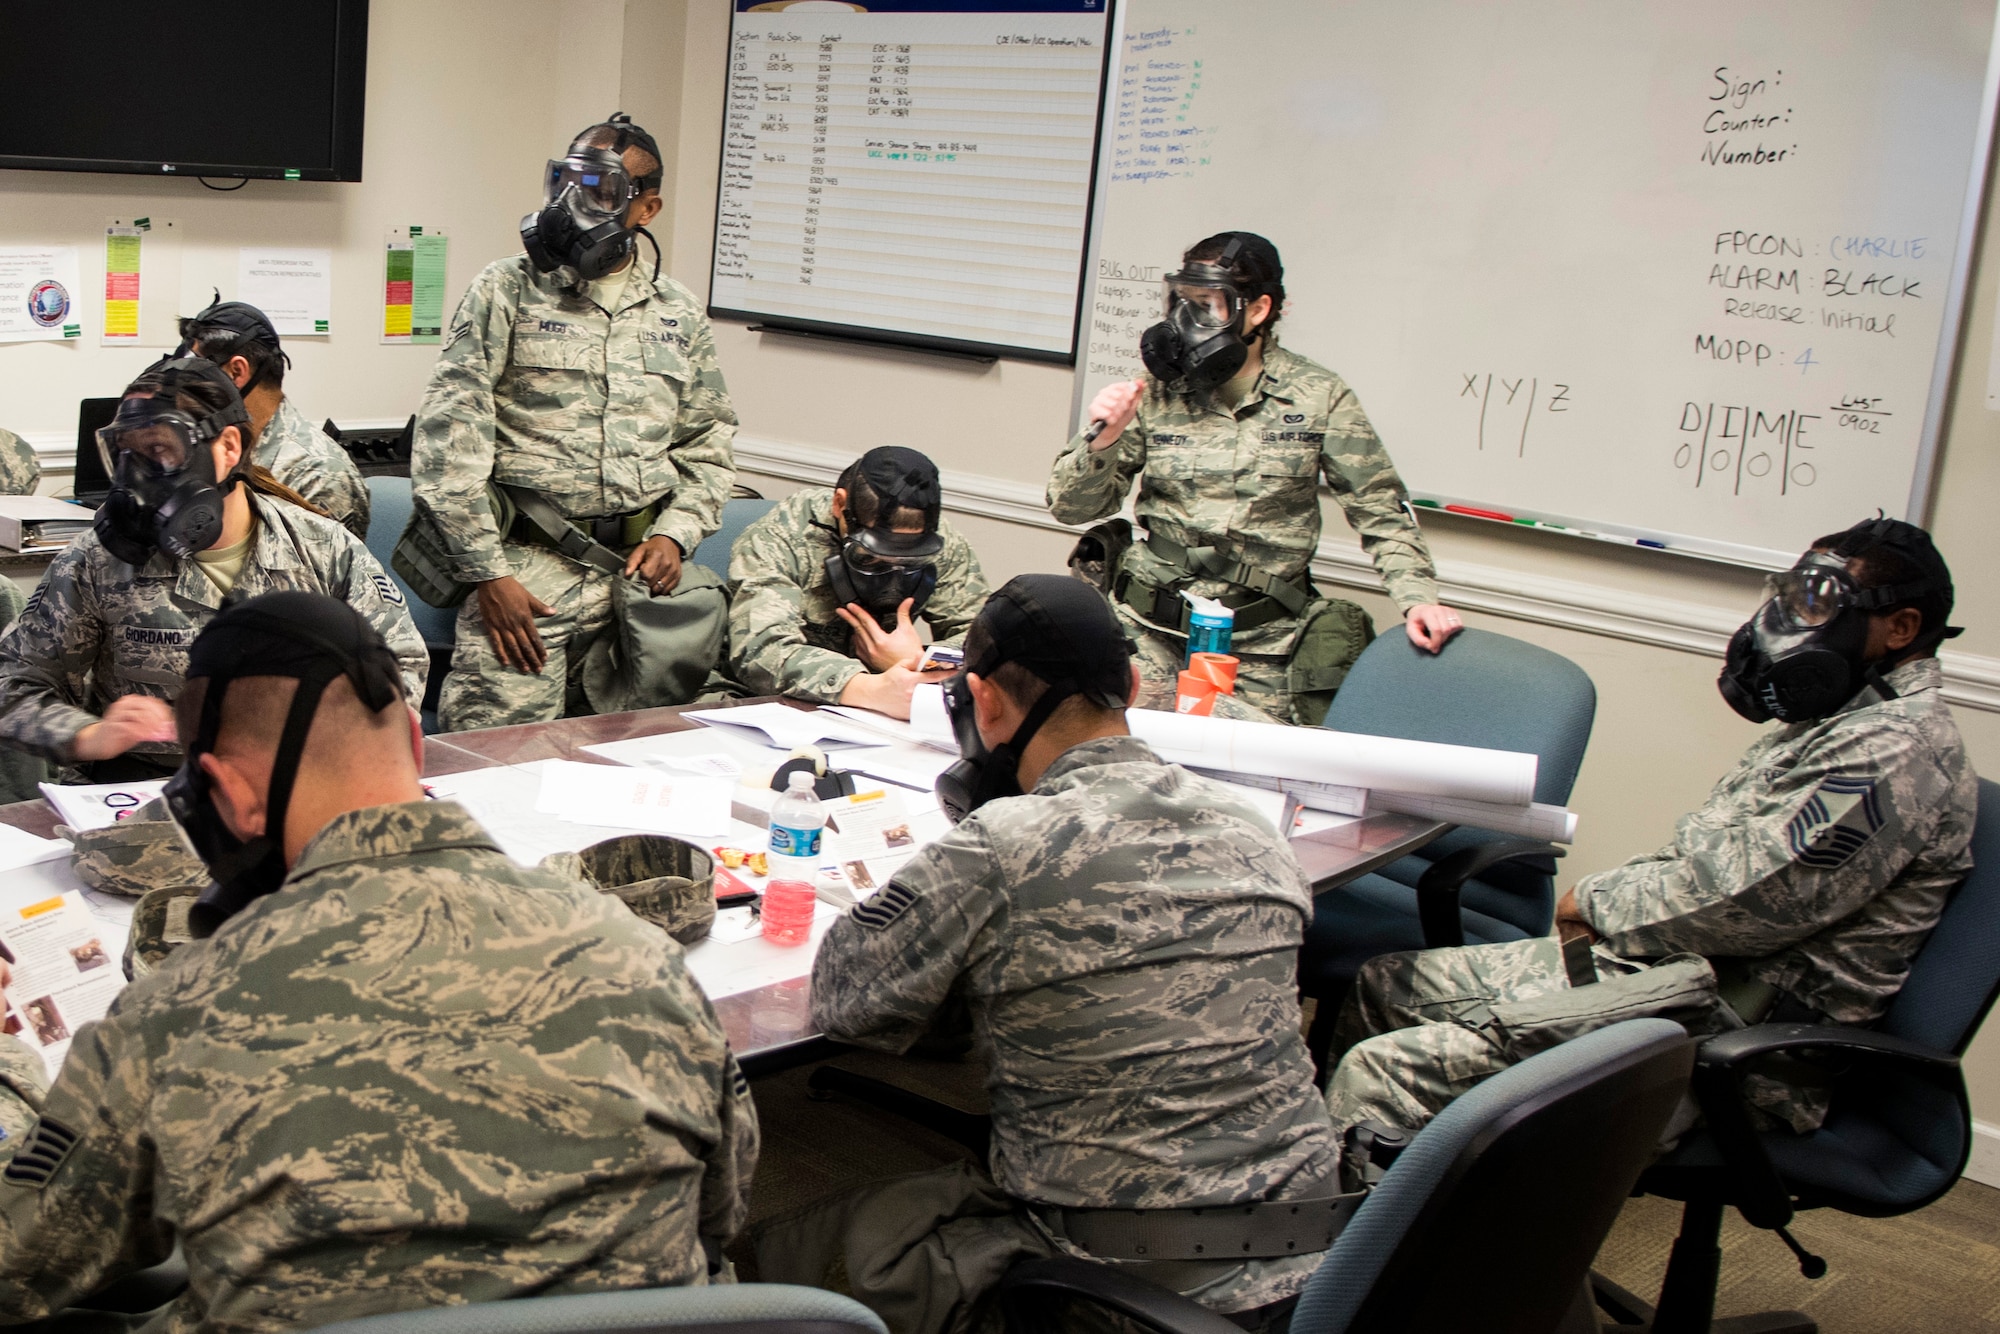 Airmen from the 4th Civil Engineer Squadron review Airman’s Manuals for proper procedures concerning attacks during exercise Coronet Warrior 17-01, Jan. 30, 2017, at Seymour Johnson Air Force Base, North Carolina. The expeditionary exercise was conducted to keep Airmen’s skills sharp for overseas contingency operations. (U.S. Air Force photo by Airman Shawna L. Keyes)